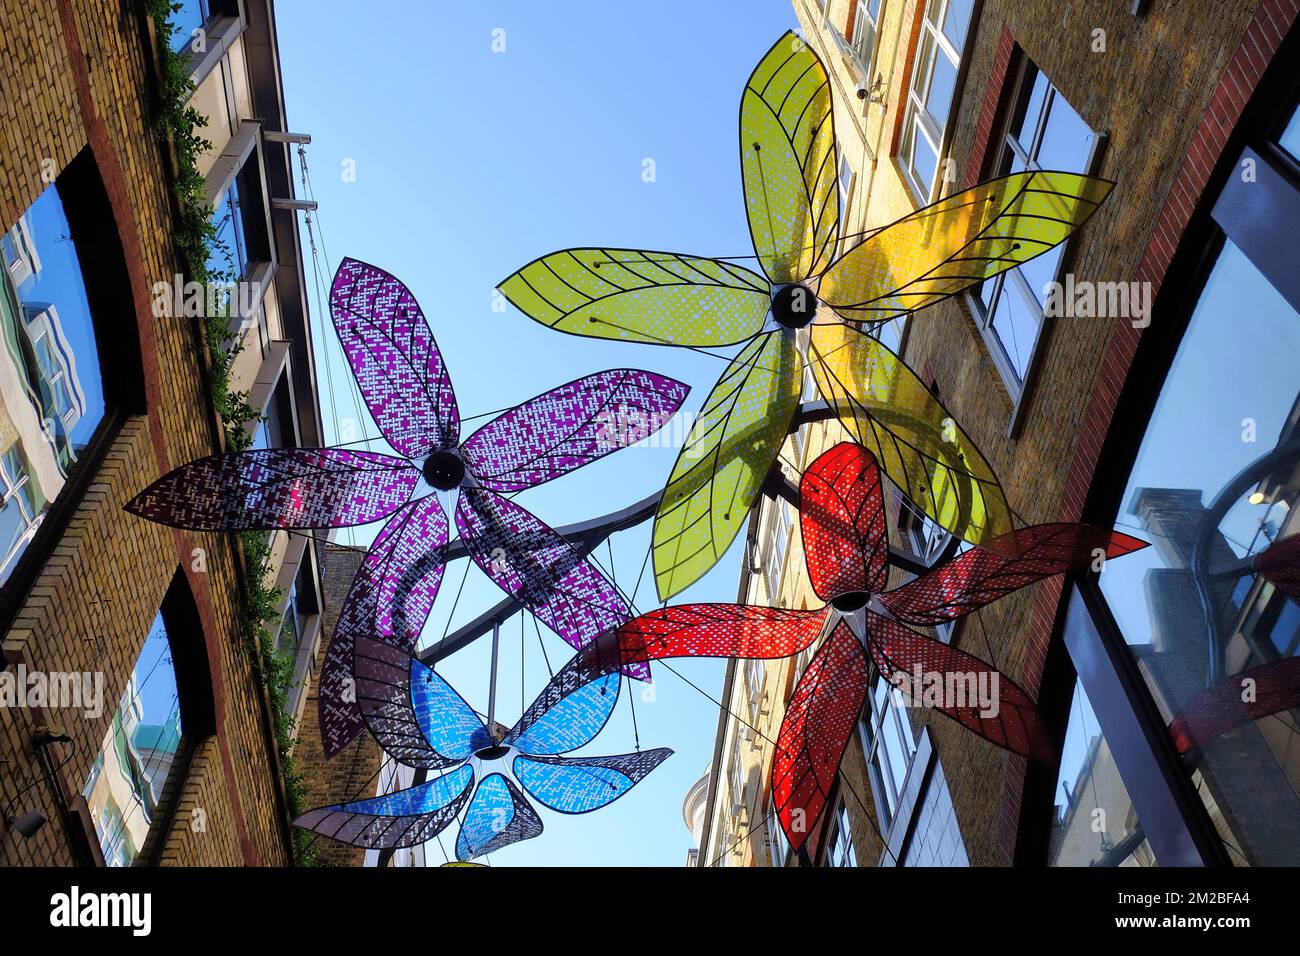 Large colourful flower artwork across Slingsby Place, Covent Garden, London, England Stock Photo